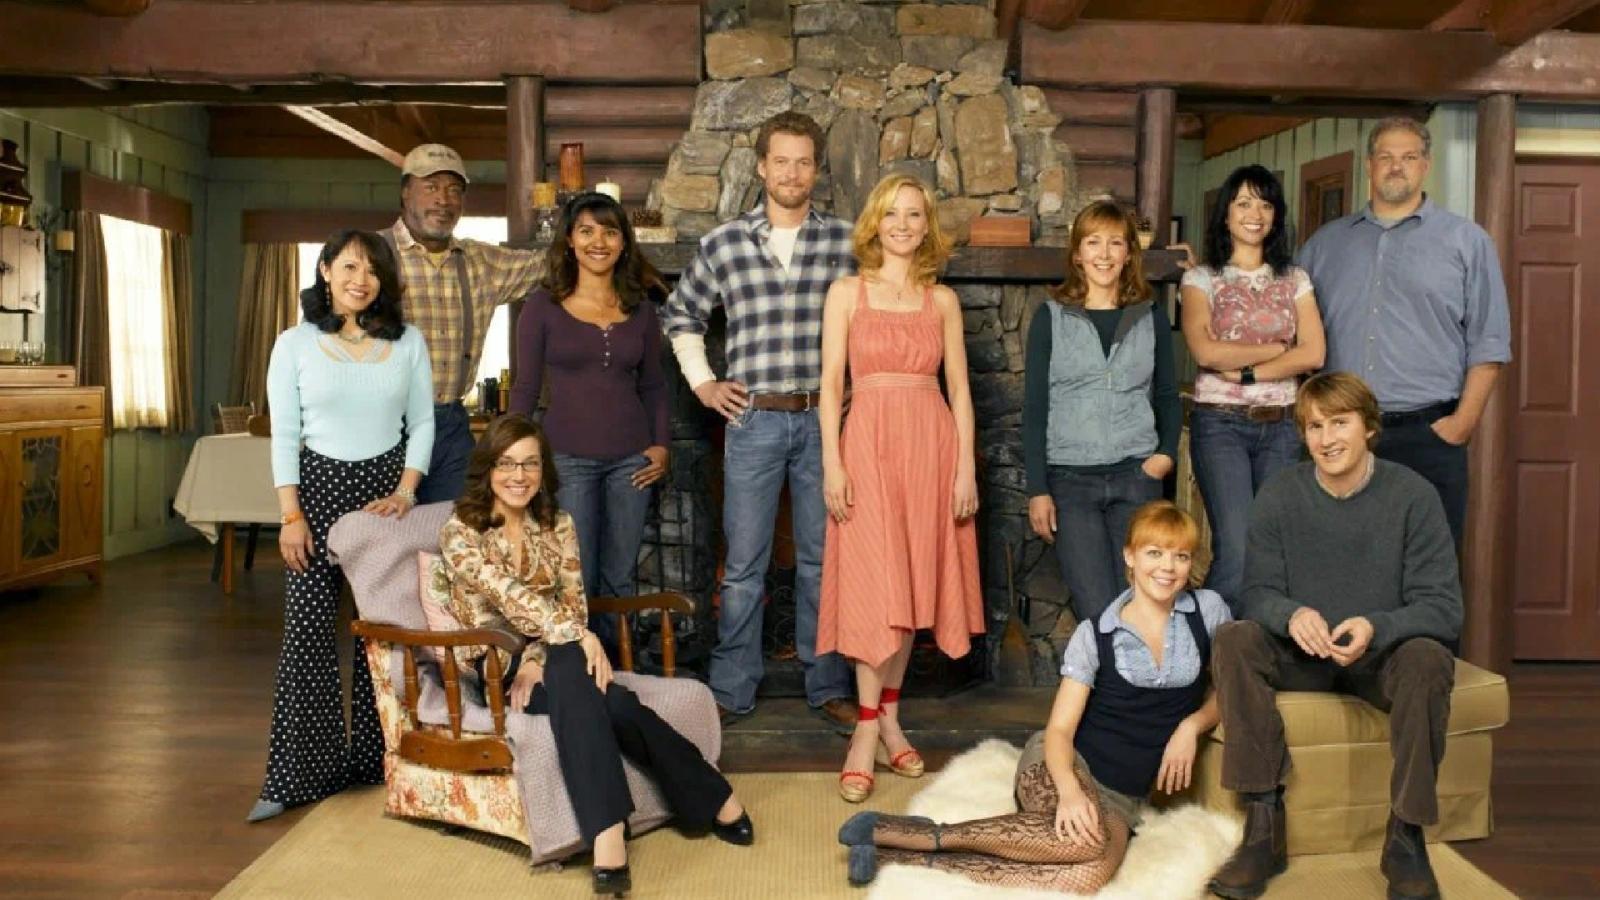 15 Similar Shows to Sweet Magnolias With Cozy Small-Town Vibes - image 8